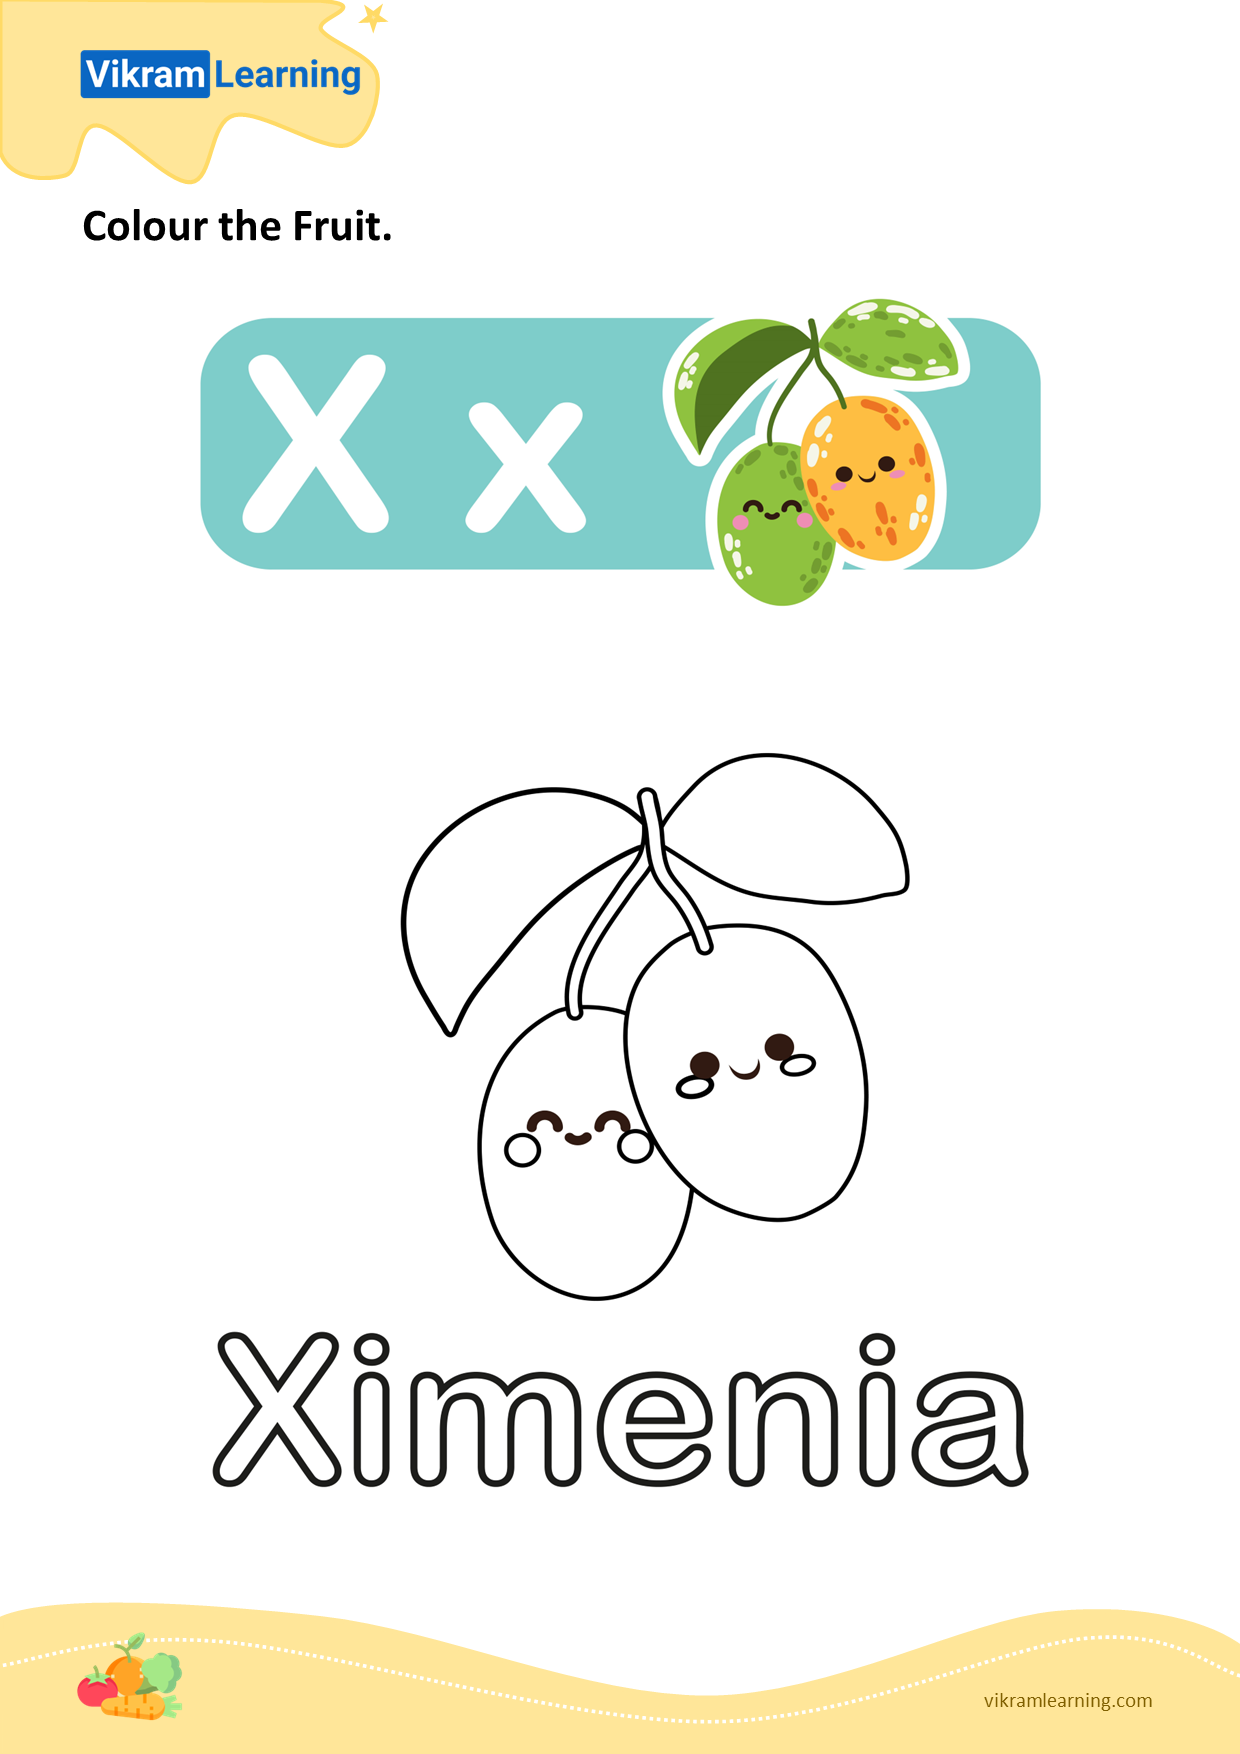 Download colour the fruit - ximenia worksheets